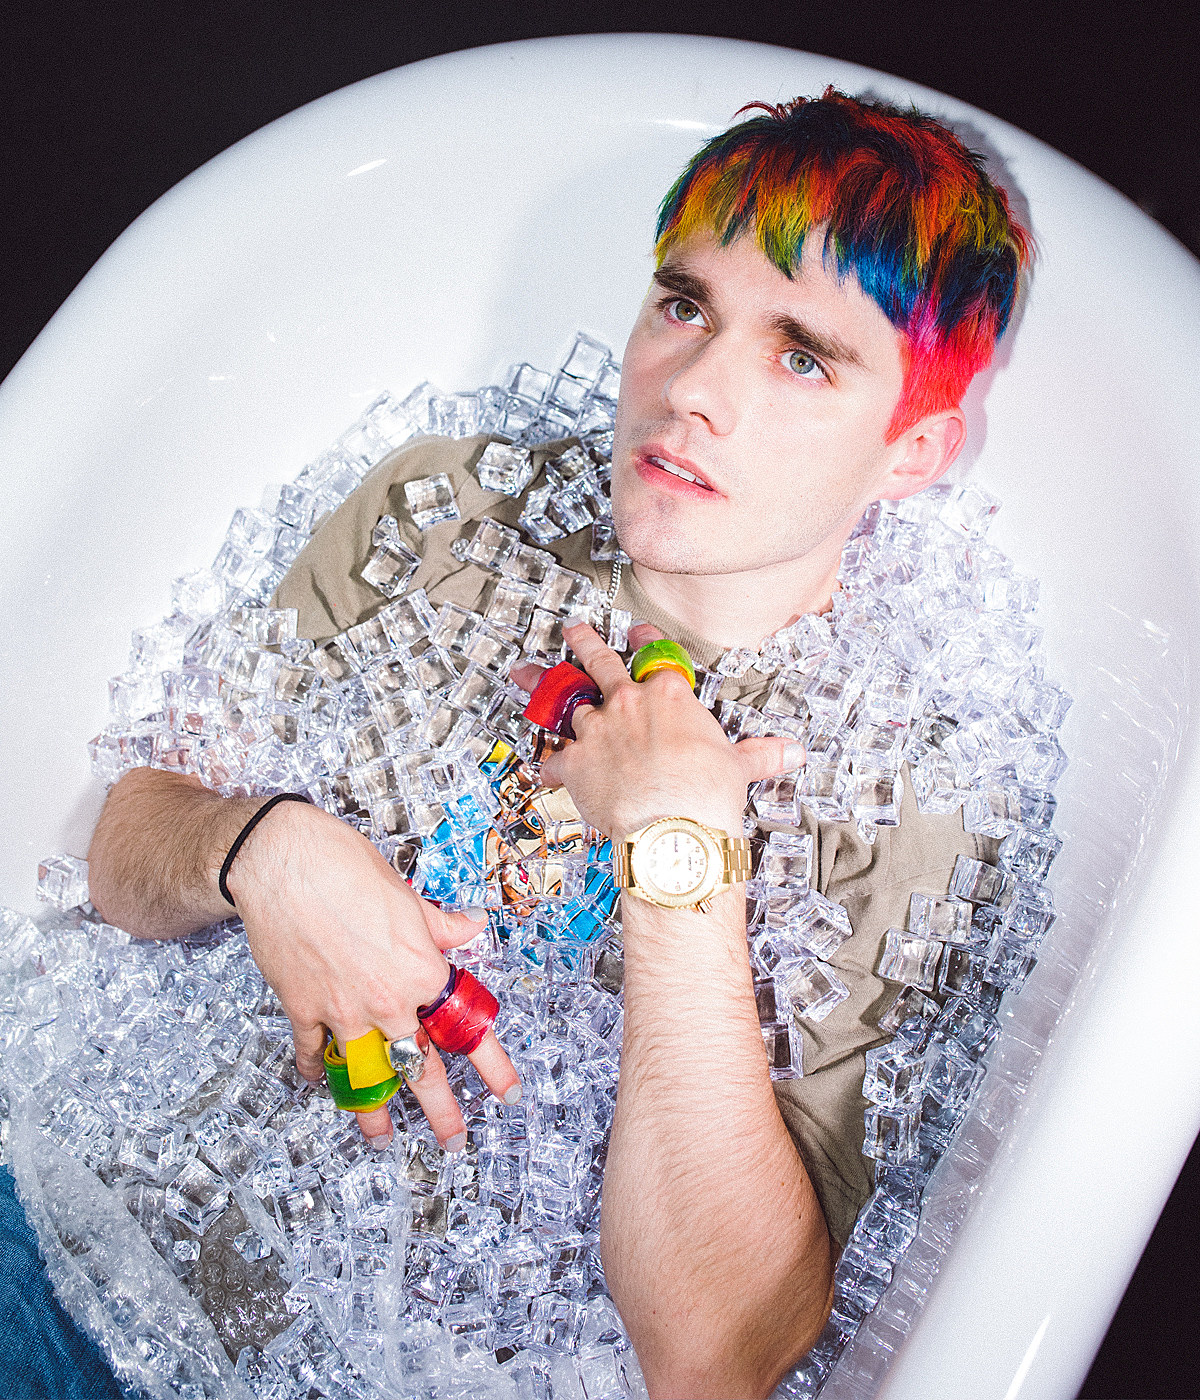 attachment-394-WATERPARKS-1200x1400-2